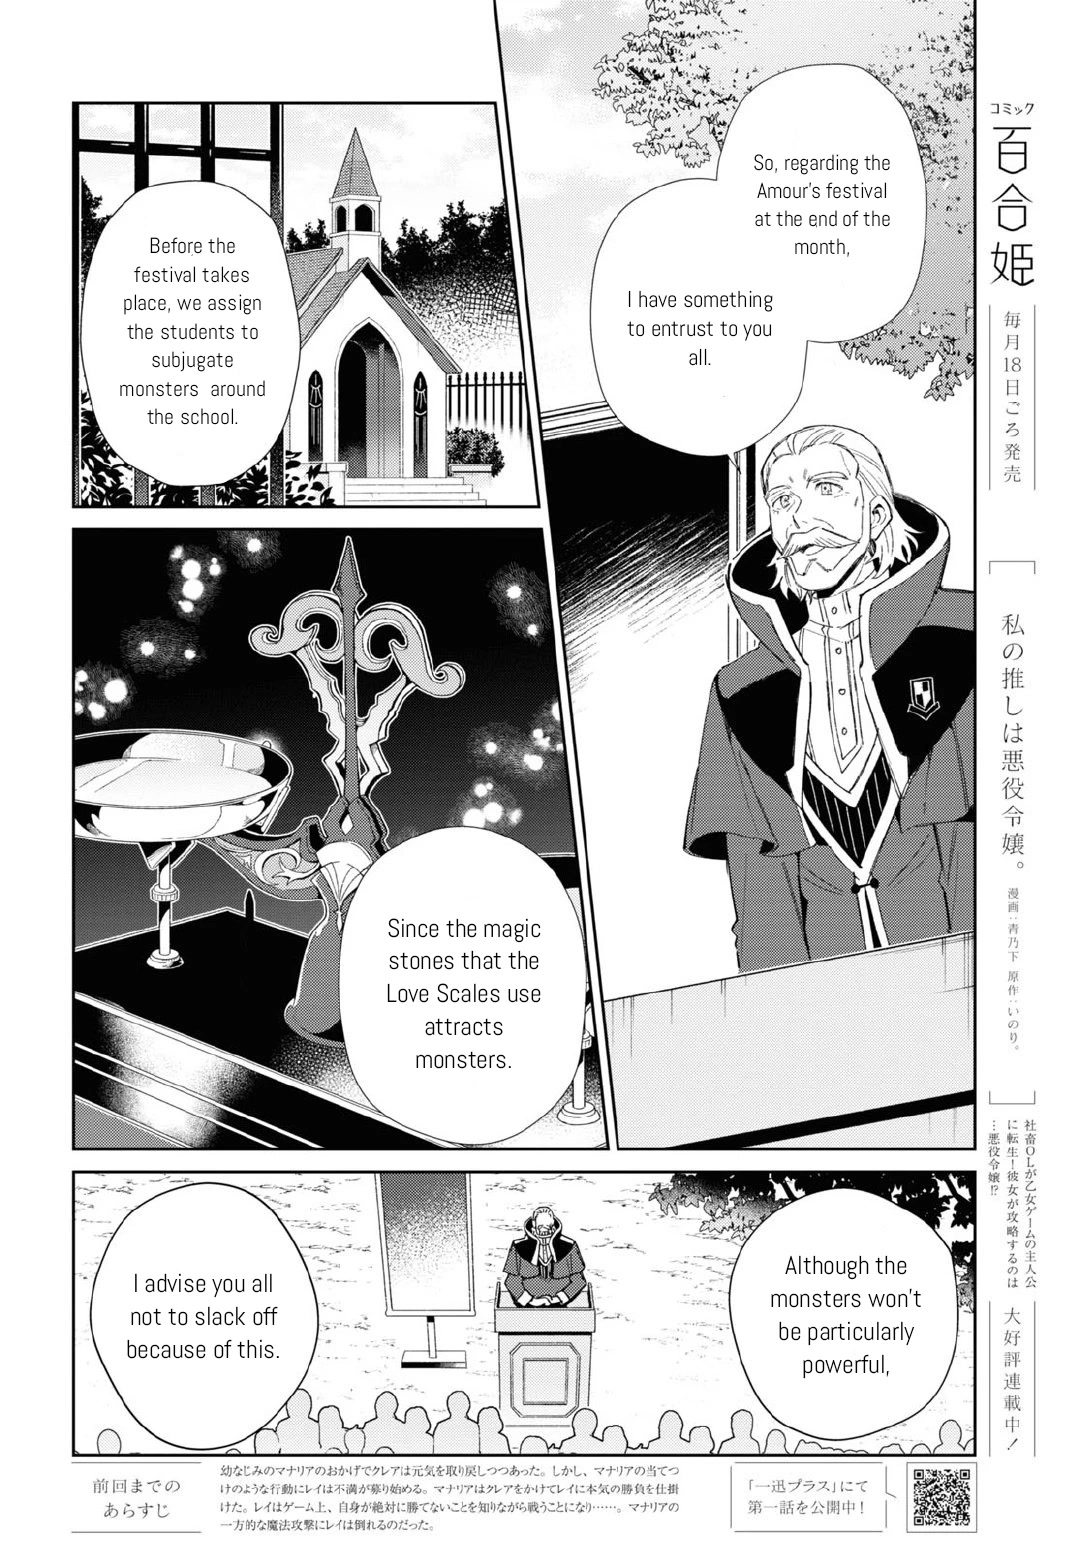 I Favor The Villainess - Page 2